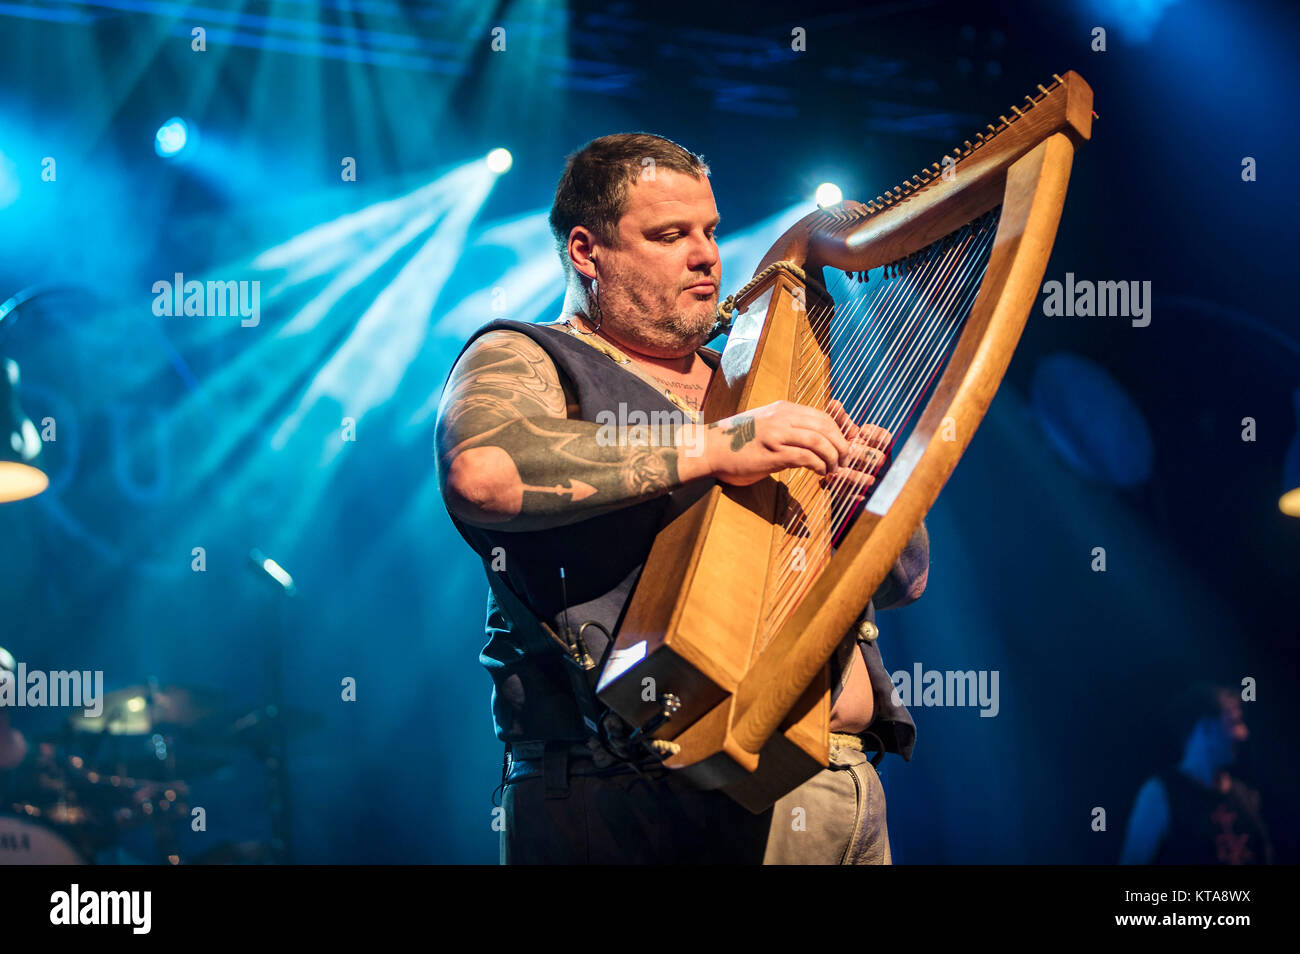 Dr. Pymonte of In Extremo performs live on stage at Osnabrück Halle on December 20, 2017 in Osnabrück, Germany. Stock Photo